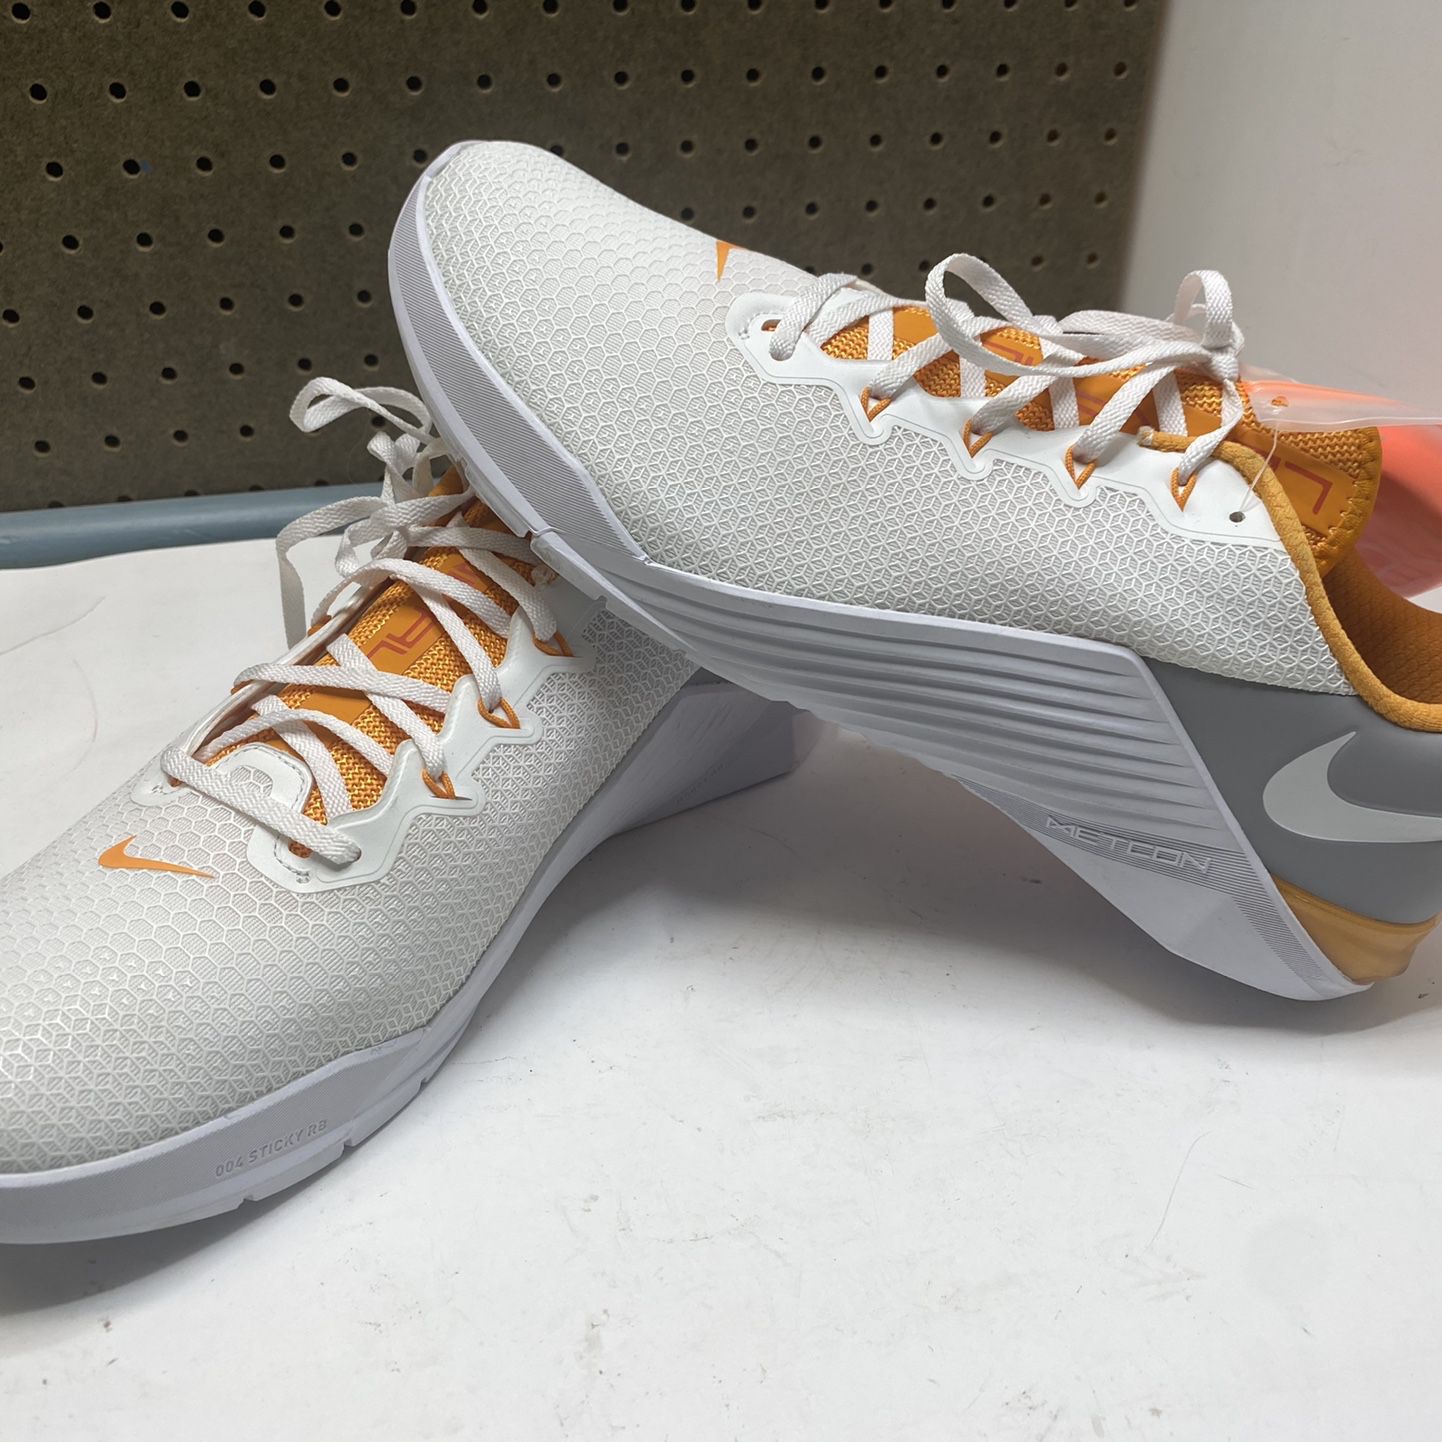 NIKE METCON ID Brunt Orange And White SZ 13 [CJ5613-991] New/Tags/ for Sale in Spring CA - OfferUp